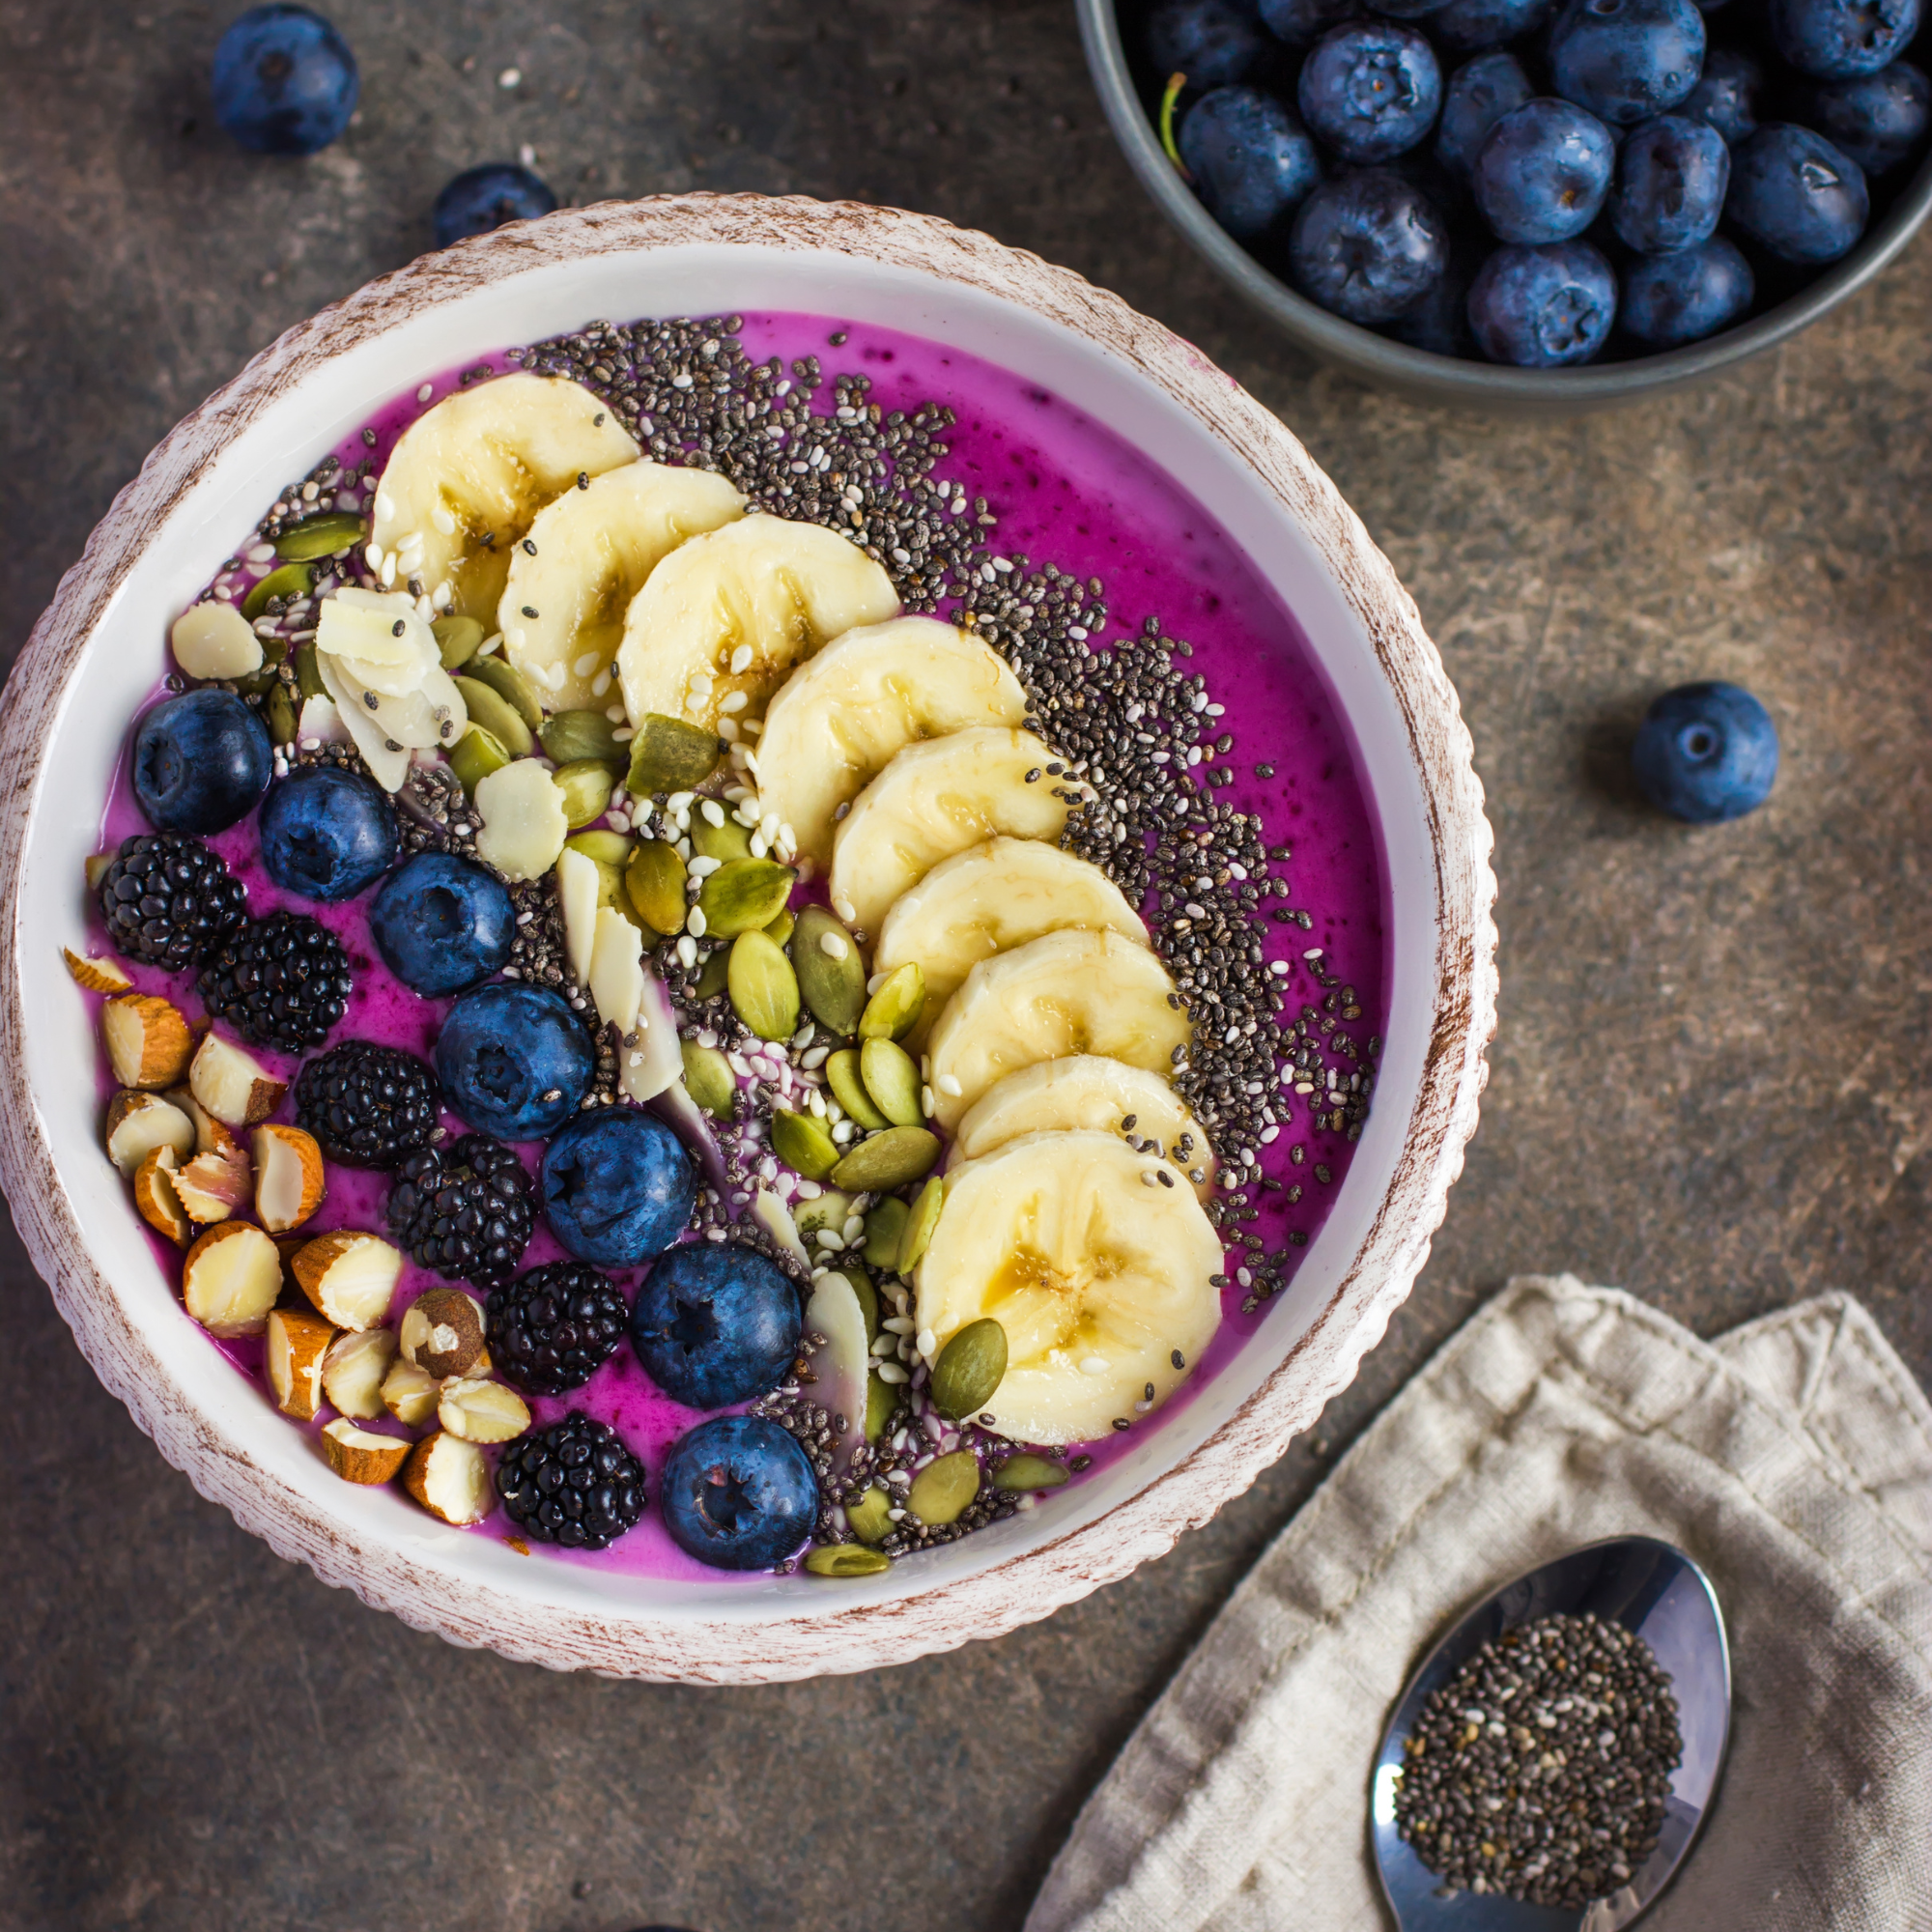 Blueberry smoothie bowl with babana slices on top and slivered almonds and chia seeds